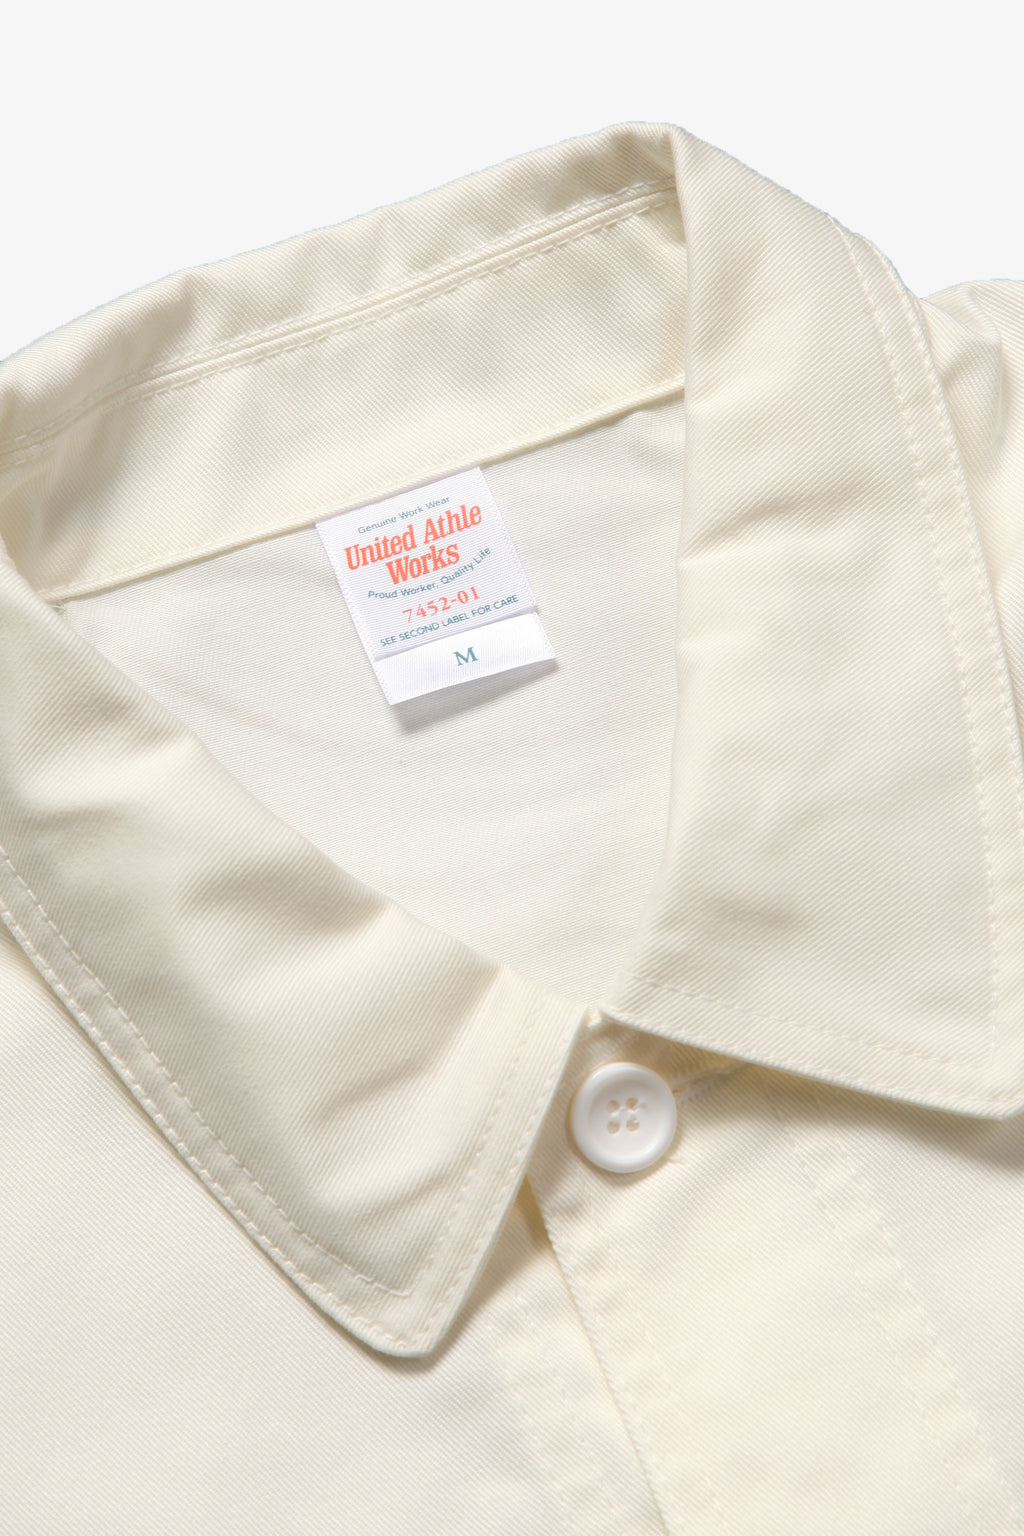 United Athle Works - 7452 Coverall Jacket - Off White